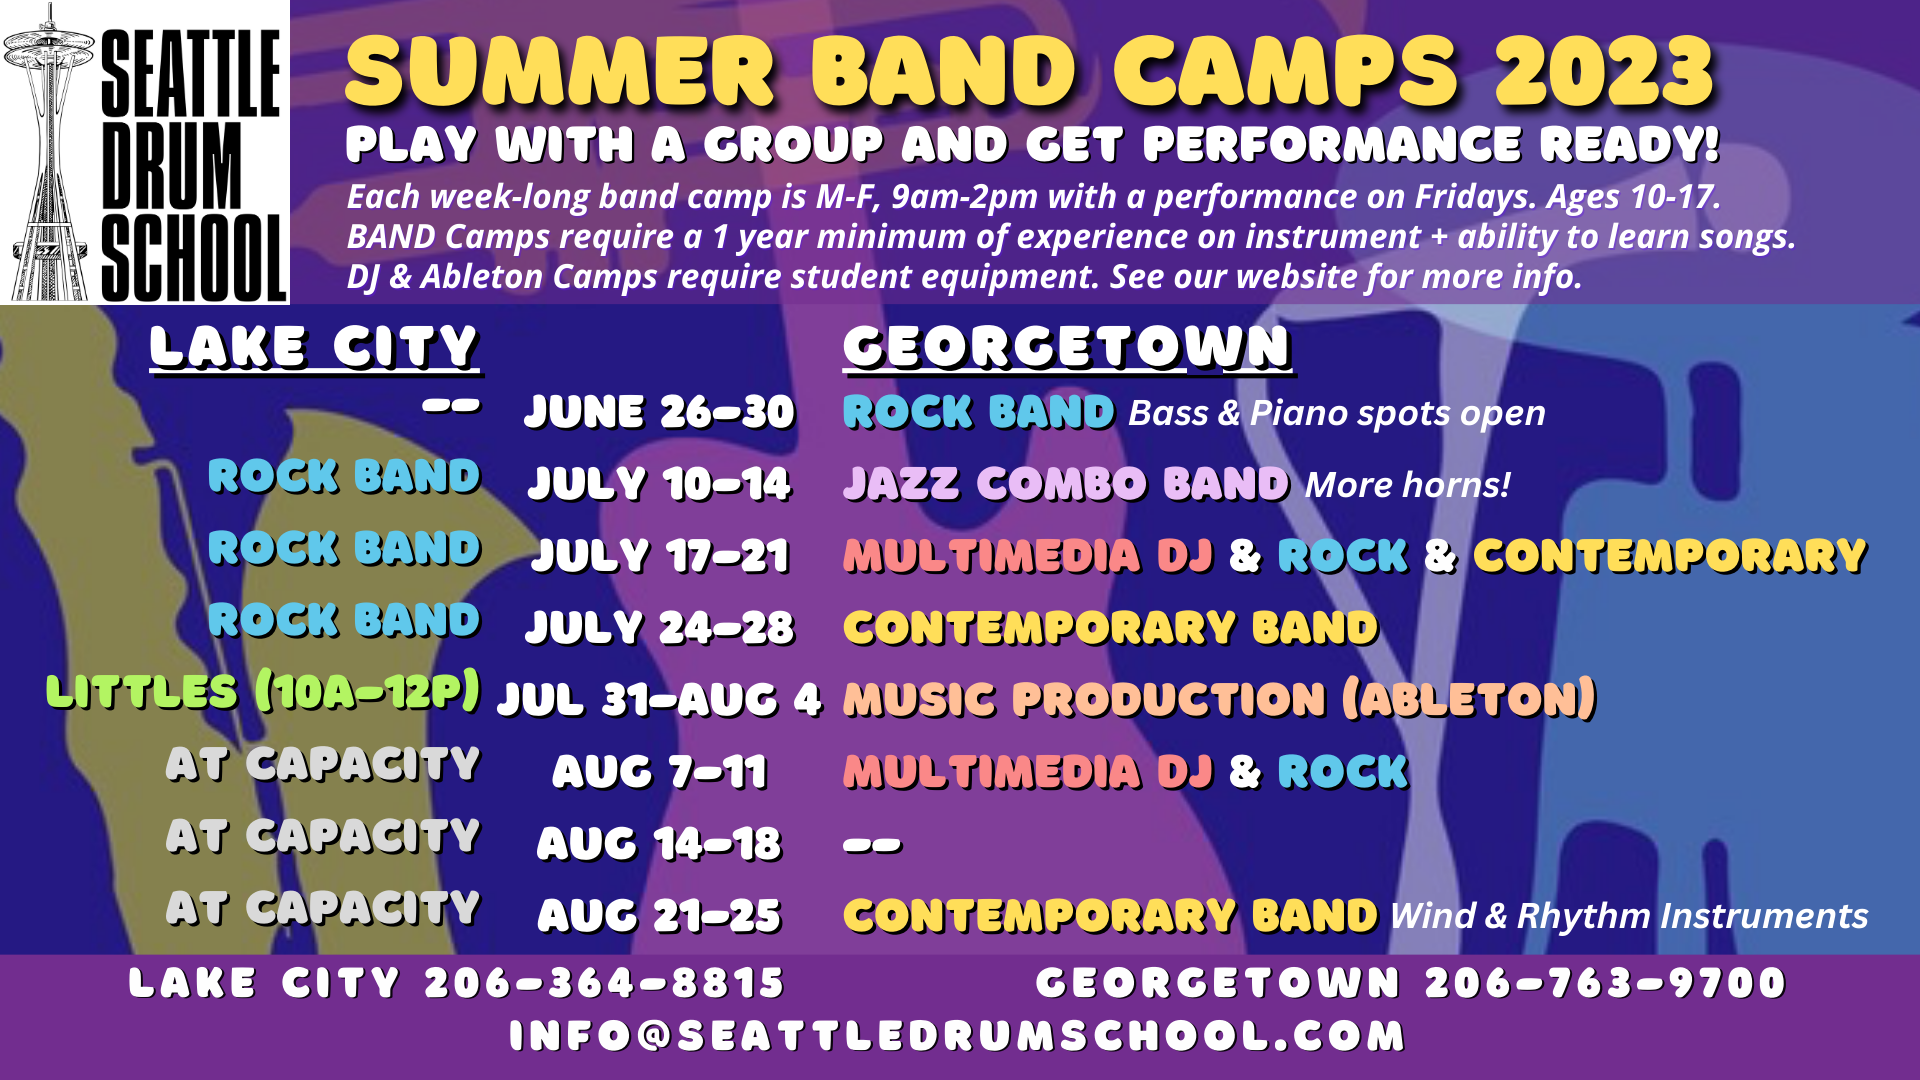 Summer Music Camps 2023 at Seattle Drum School of Music, Lake City & Georgetown!